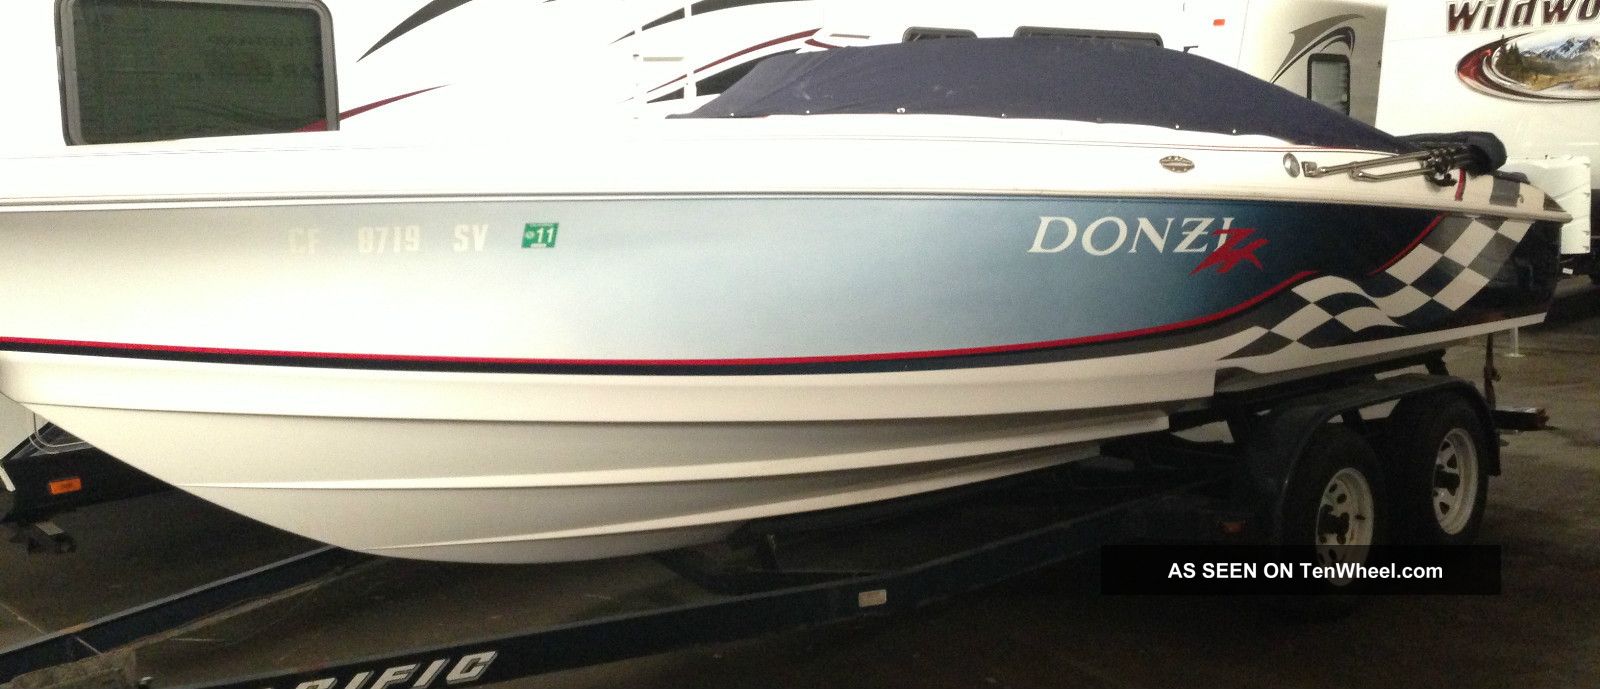 2000 Donzi 26zx Other Powerboats photo